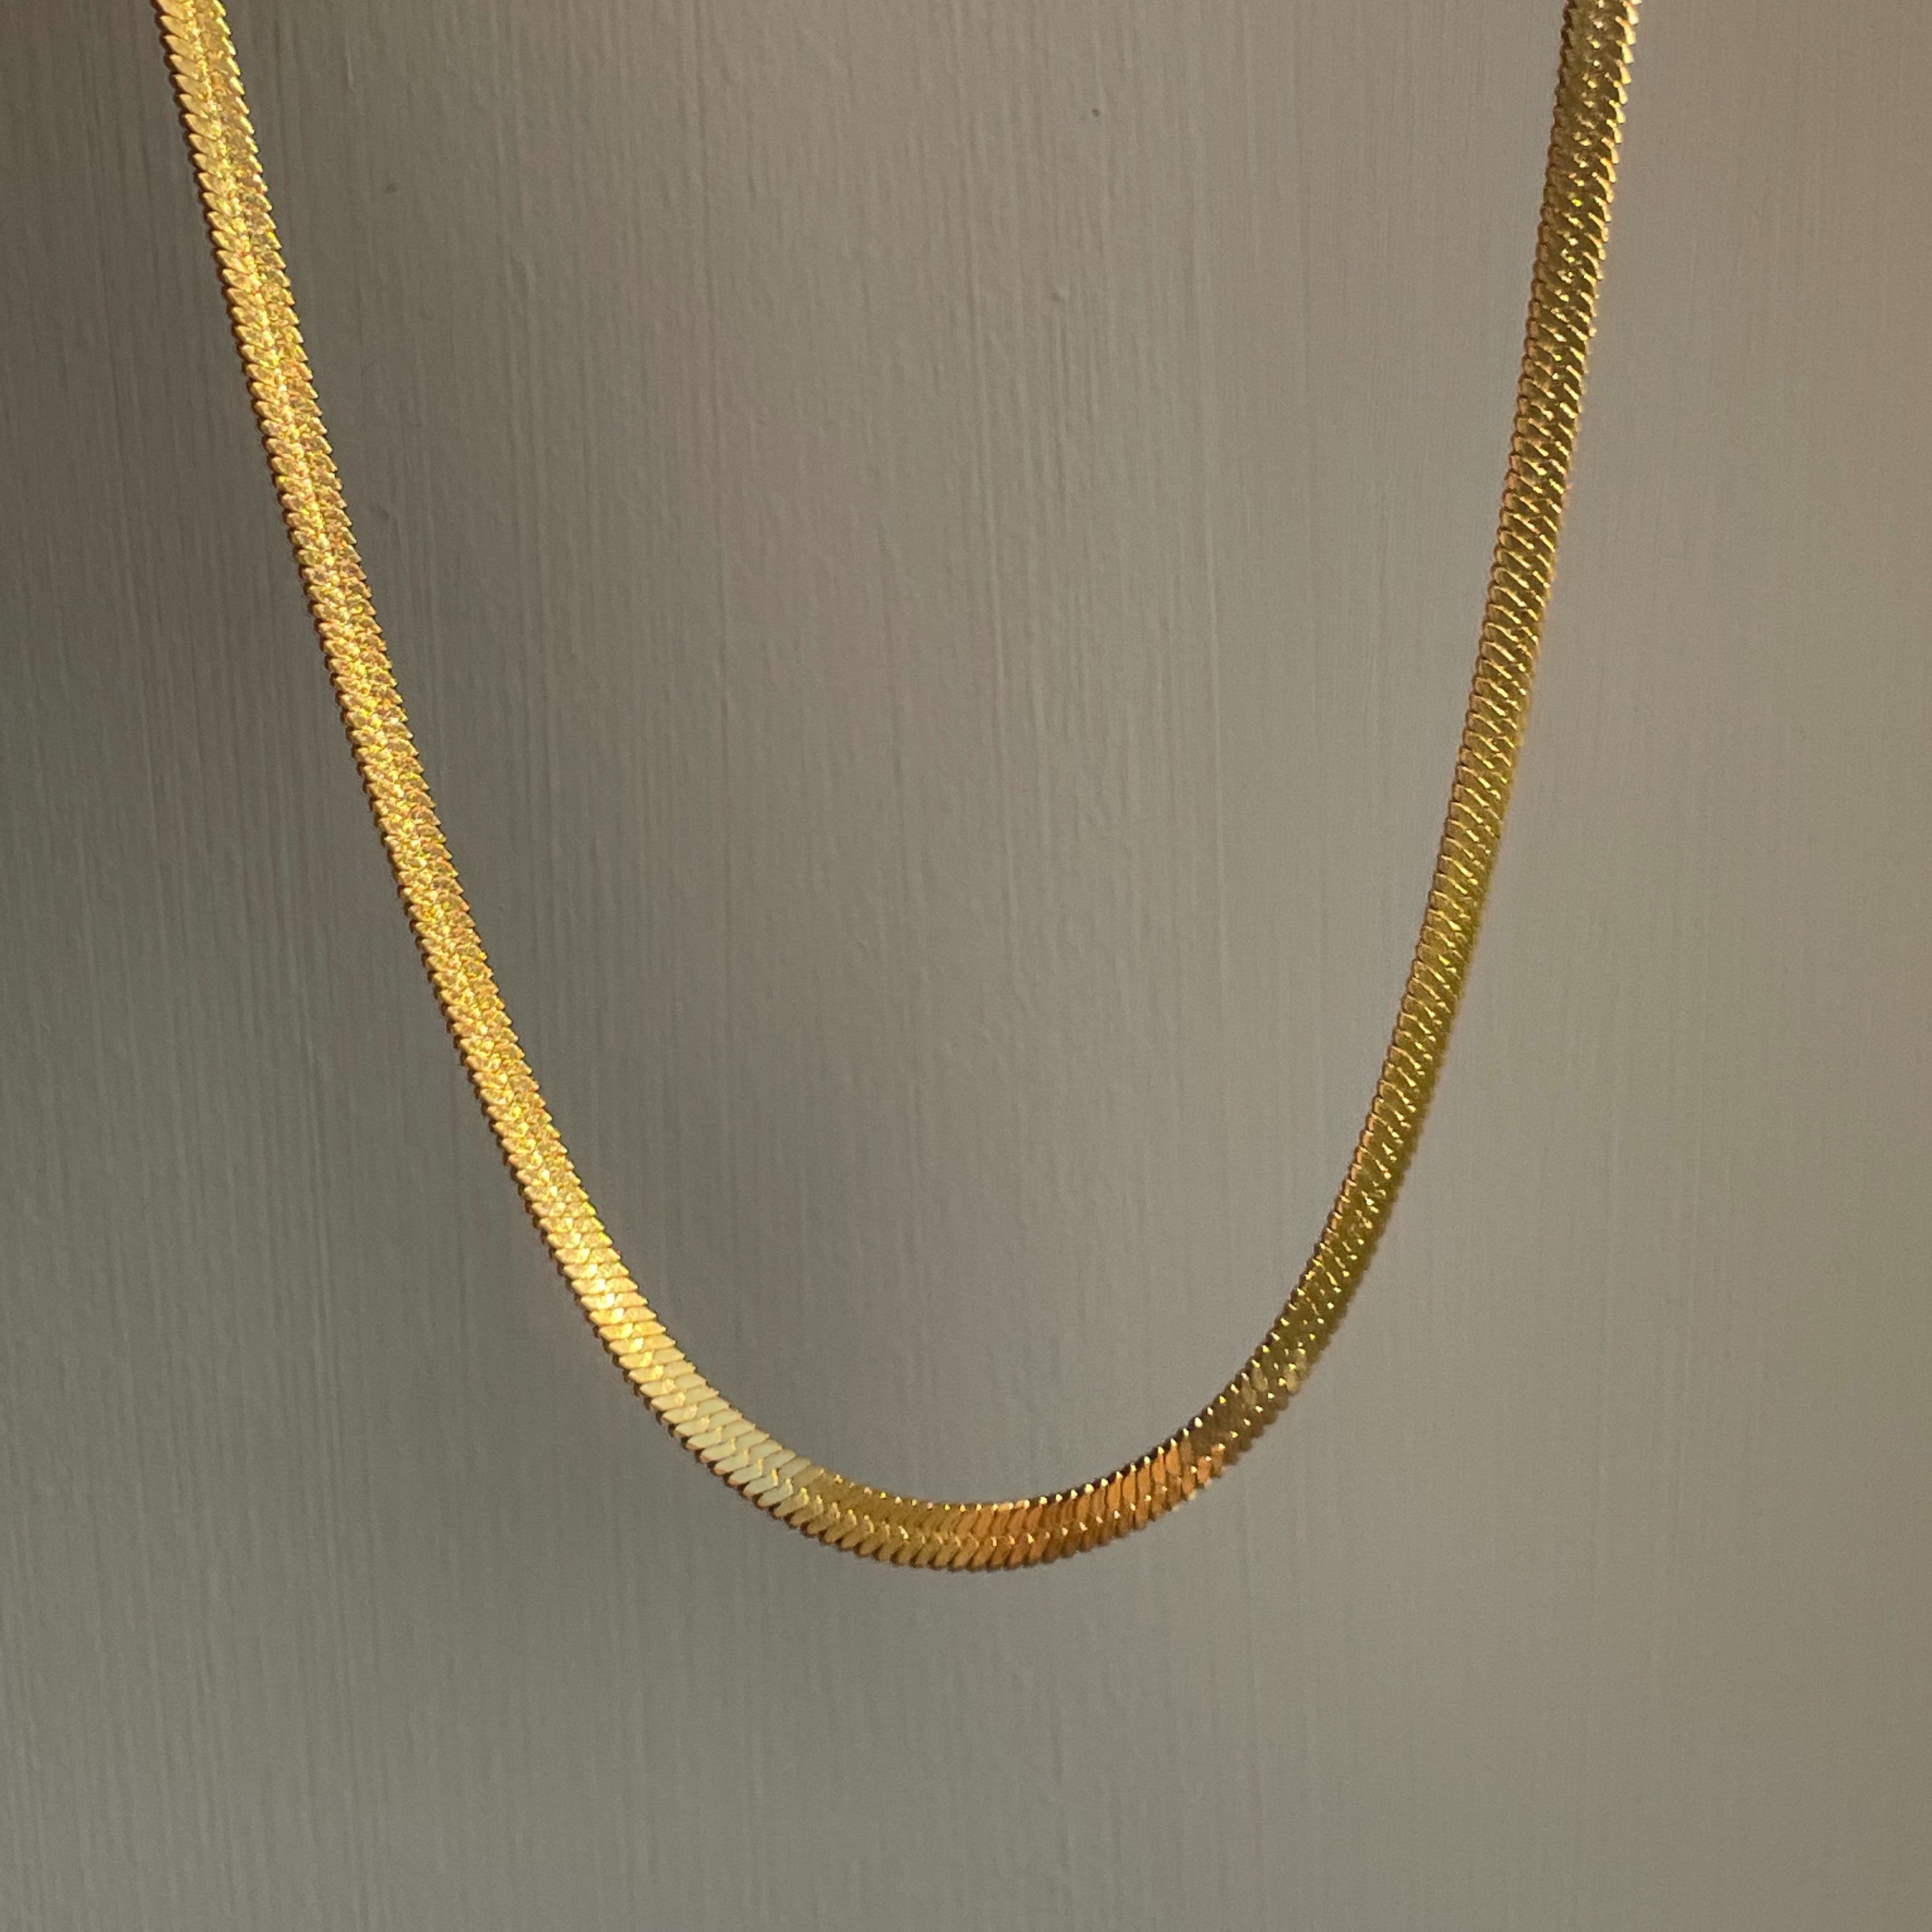 Shiny gold necklace with herringbone pattern